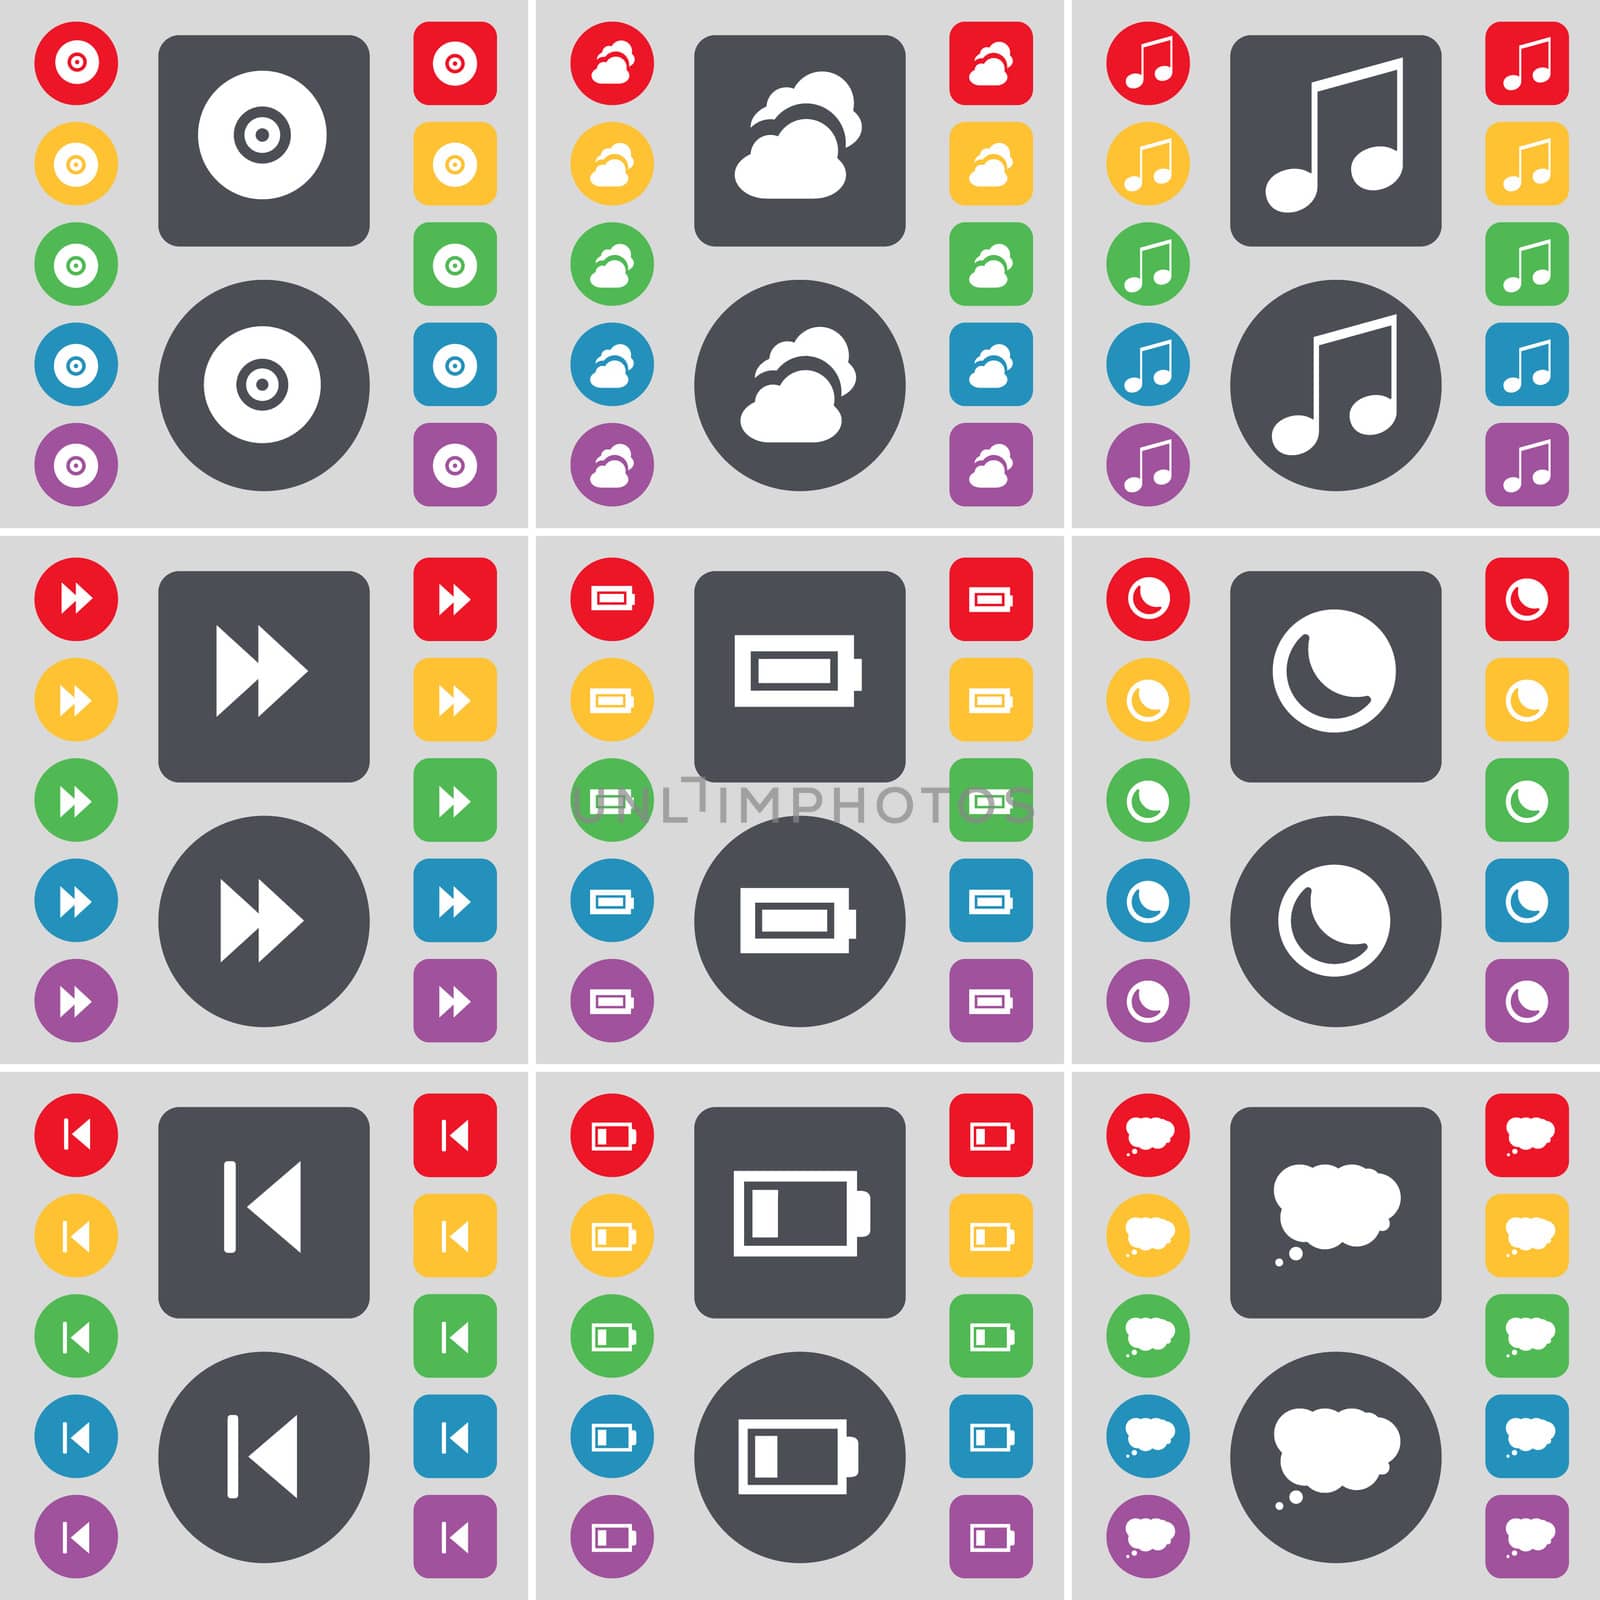 Disk, Cloud, Note, Rewind, Battery, Moon, Media skip, Chat cloud icon symbol. A large set of flat, colored buttons for your design. illustration